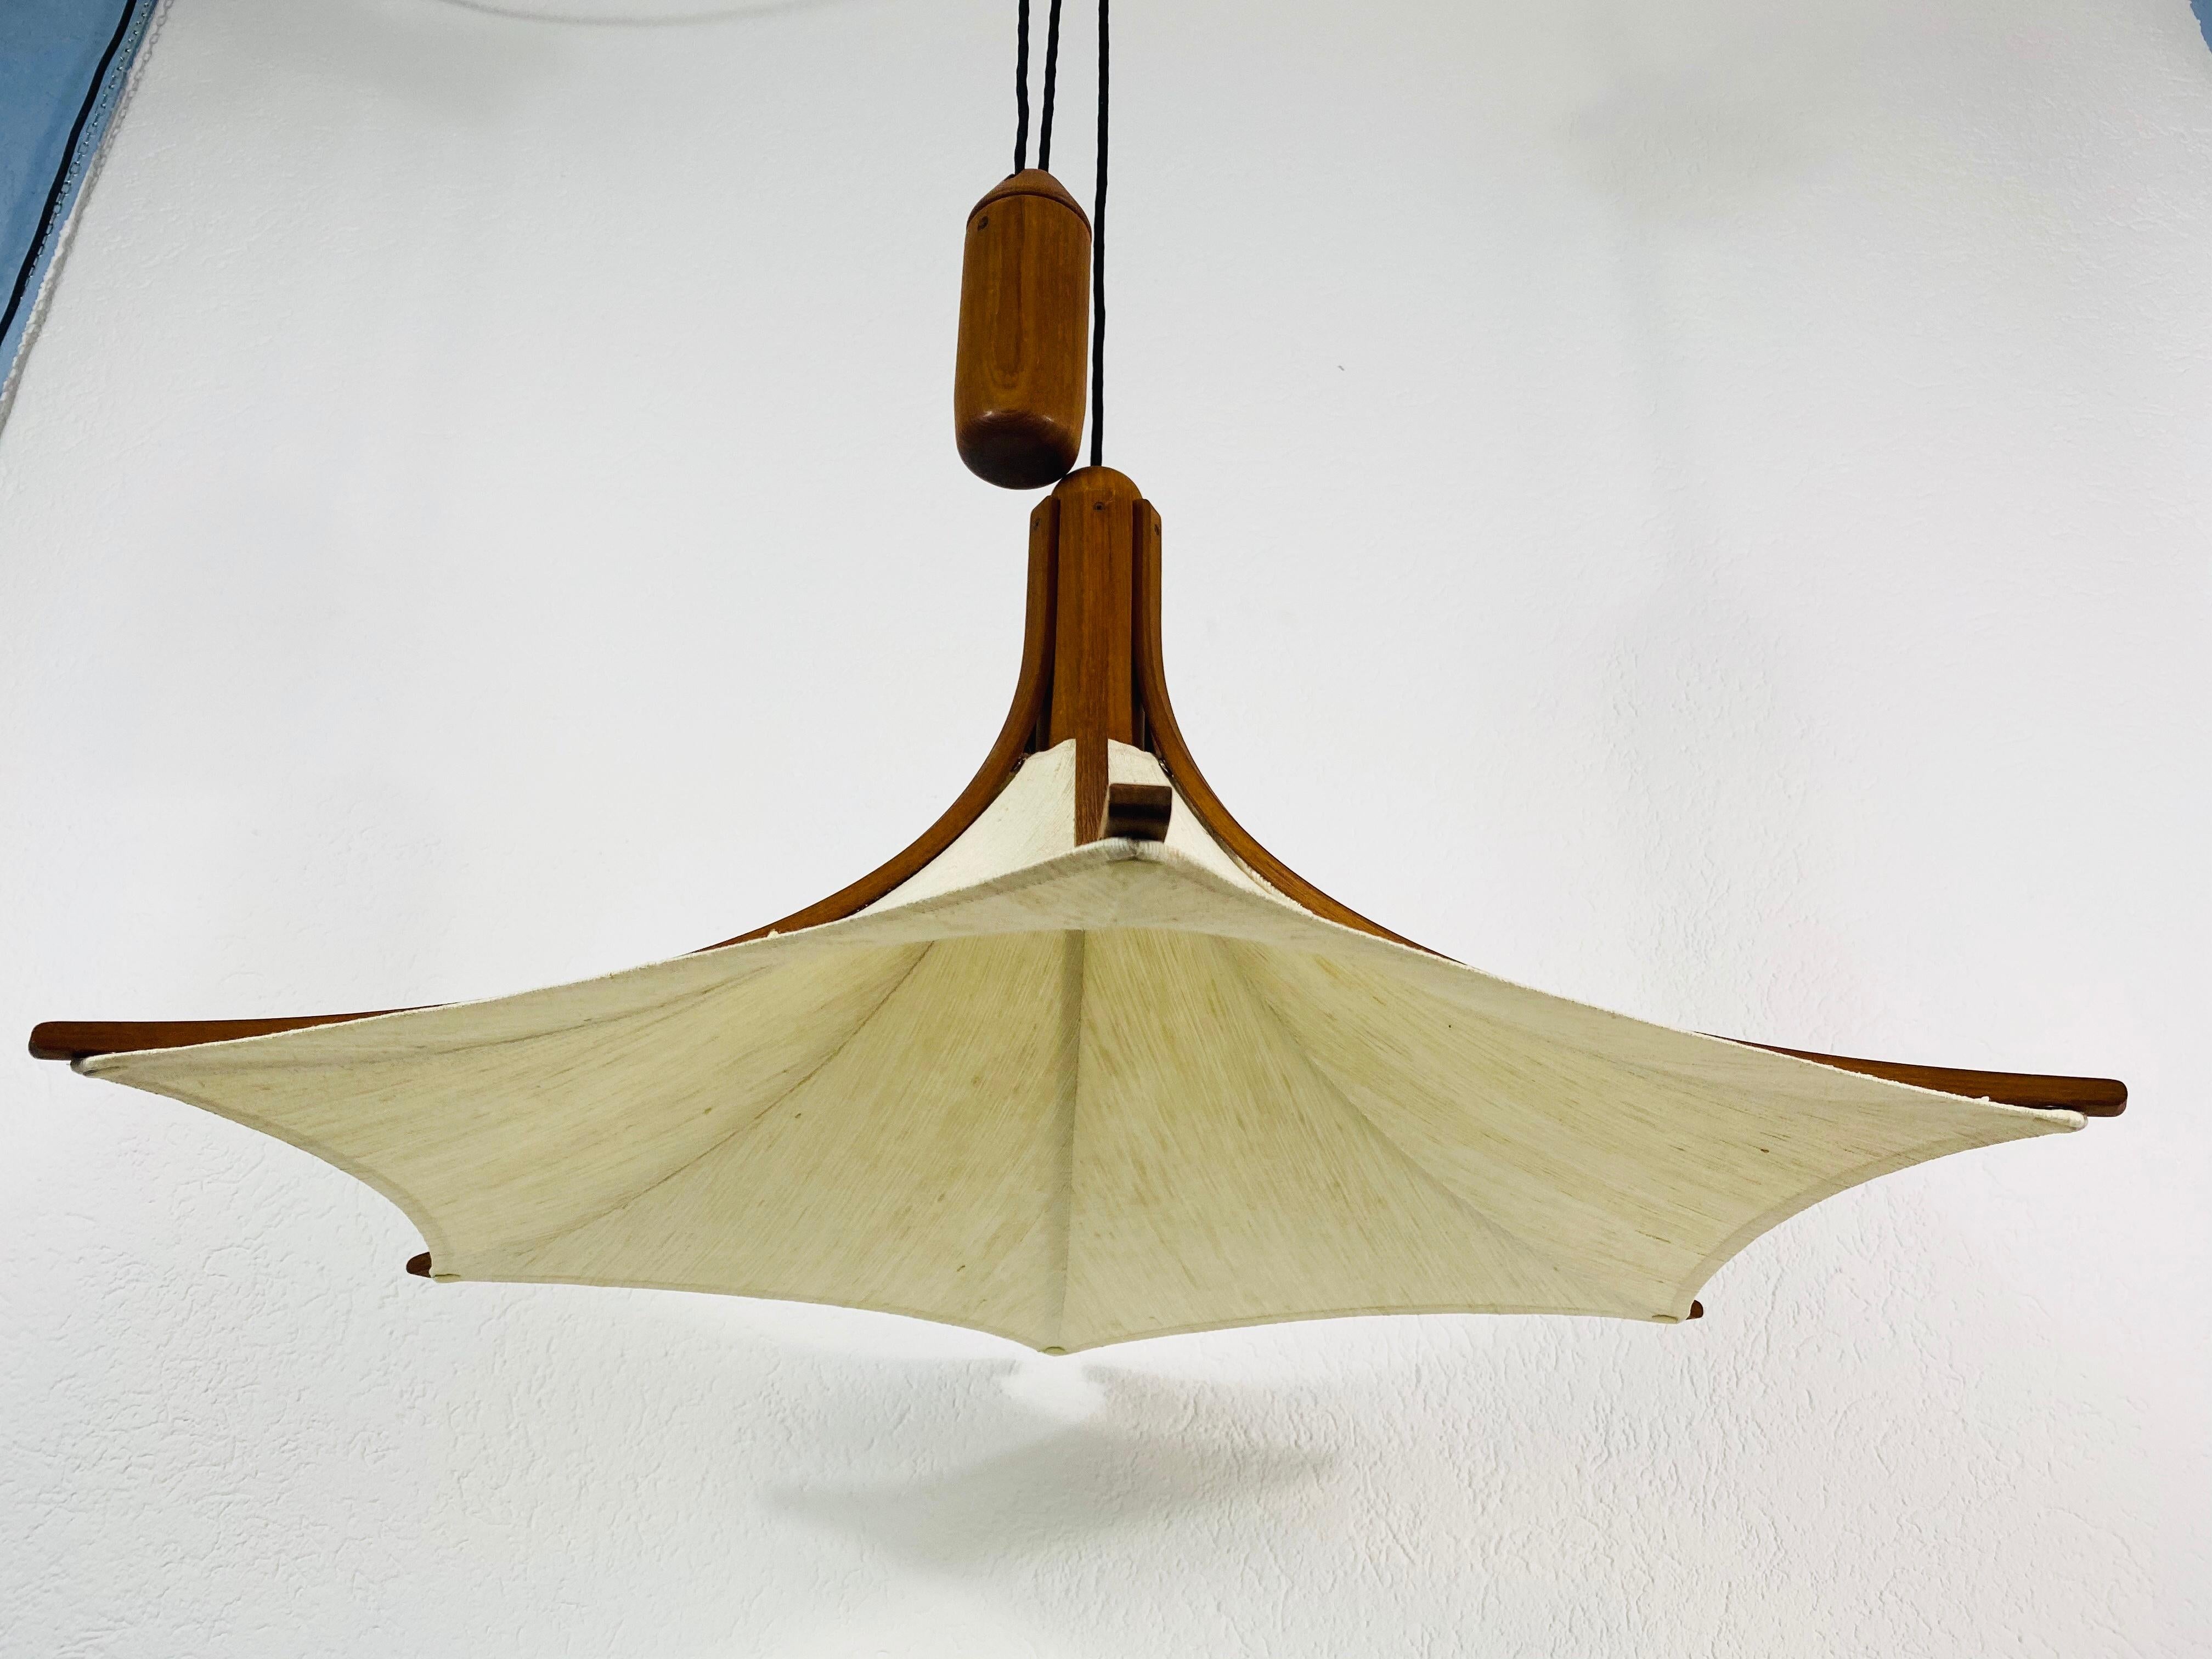 German Adjustable Midcentury Wooden Pendant Lamp with Counterweight by Domus, 1960s